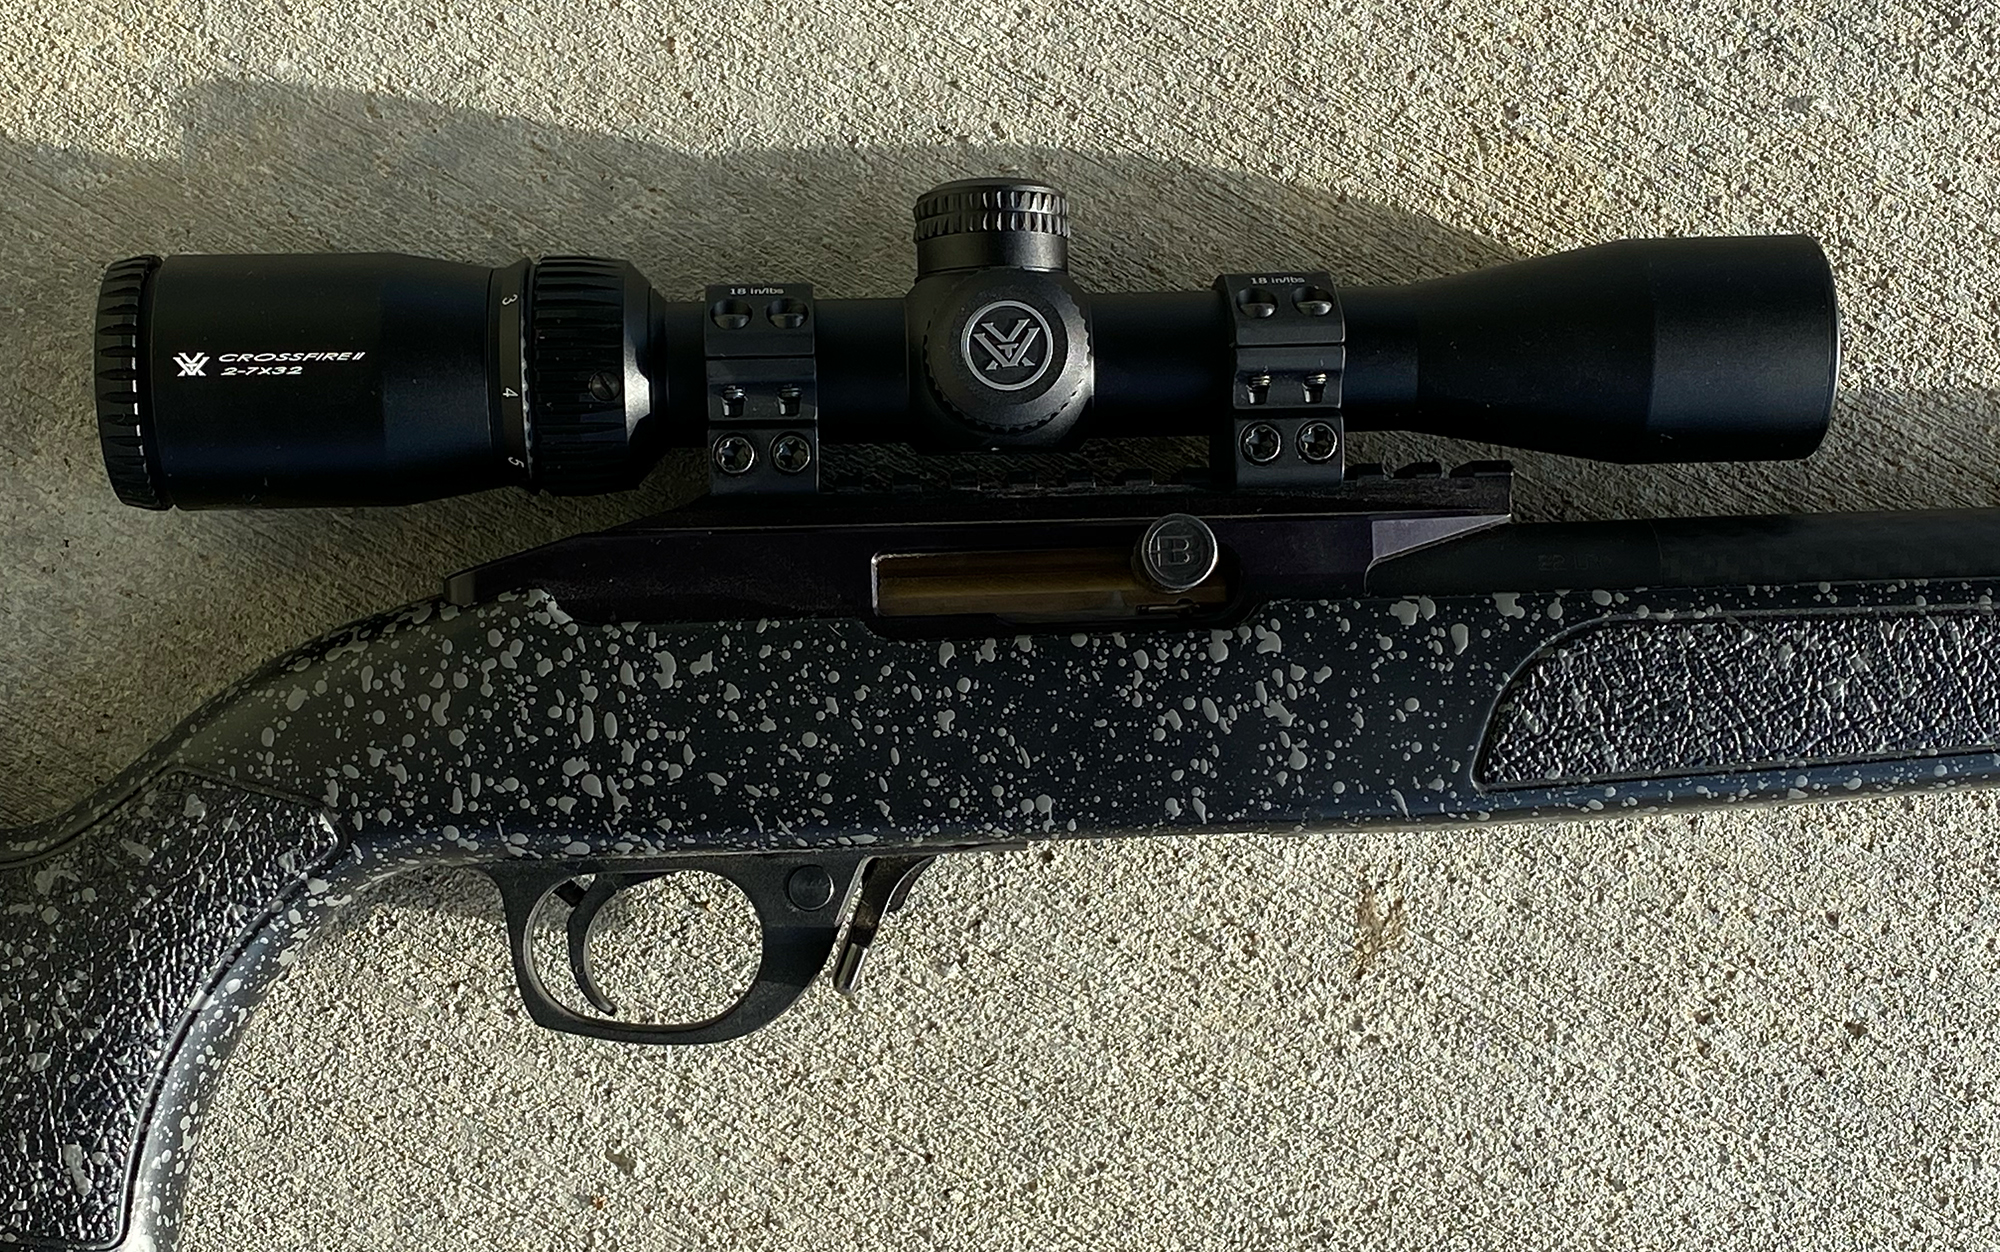 The vortex scope is mounted on a rifle.